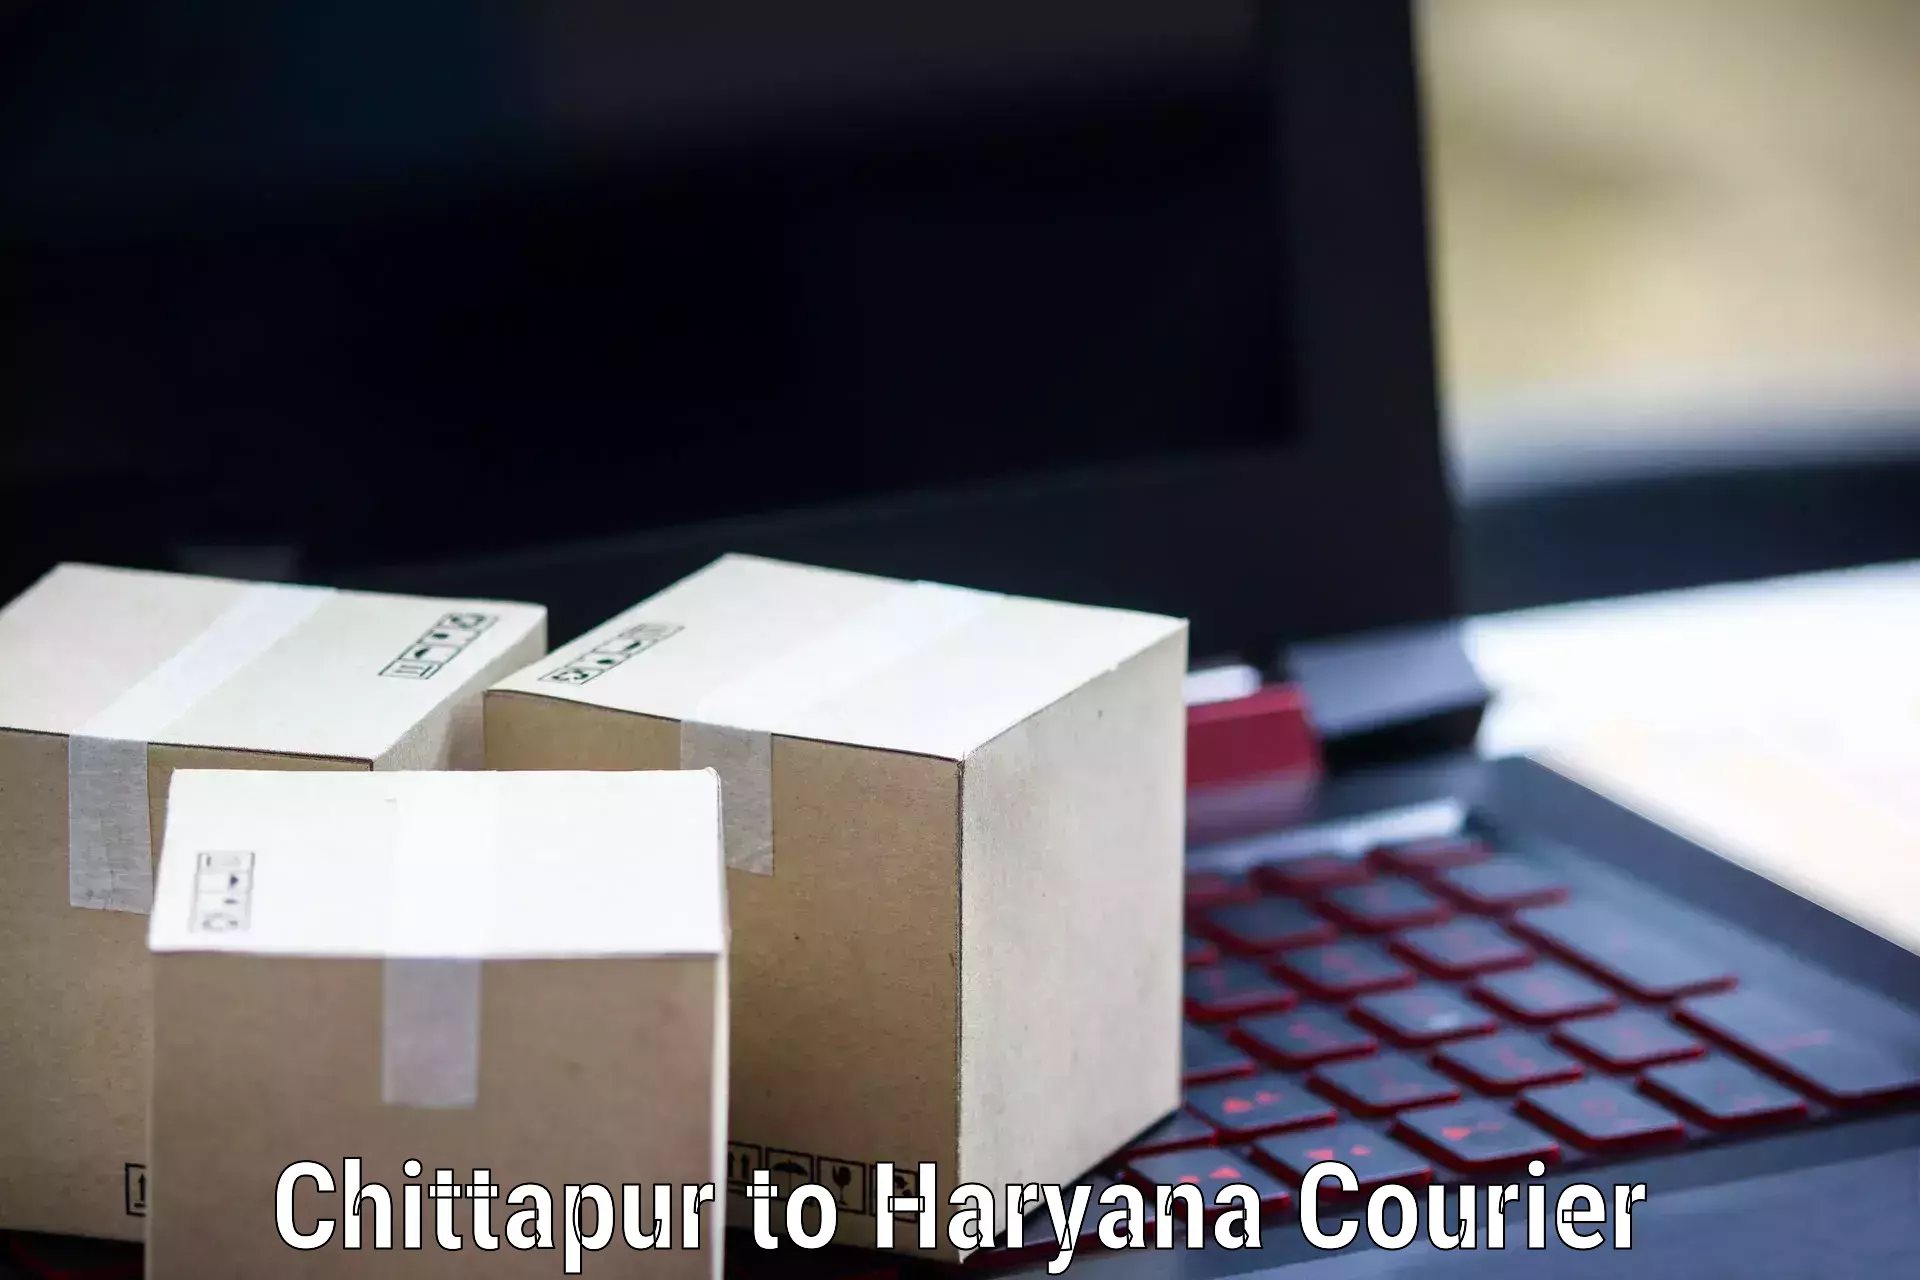 Tech-enabled shipping Chittapur to Gurgaon